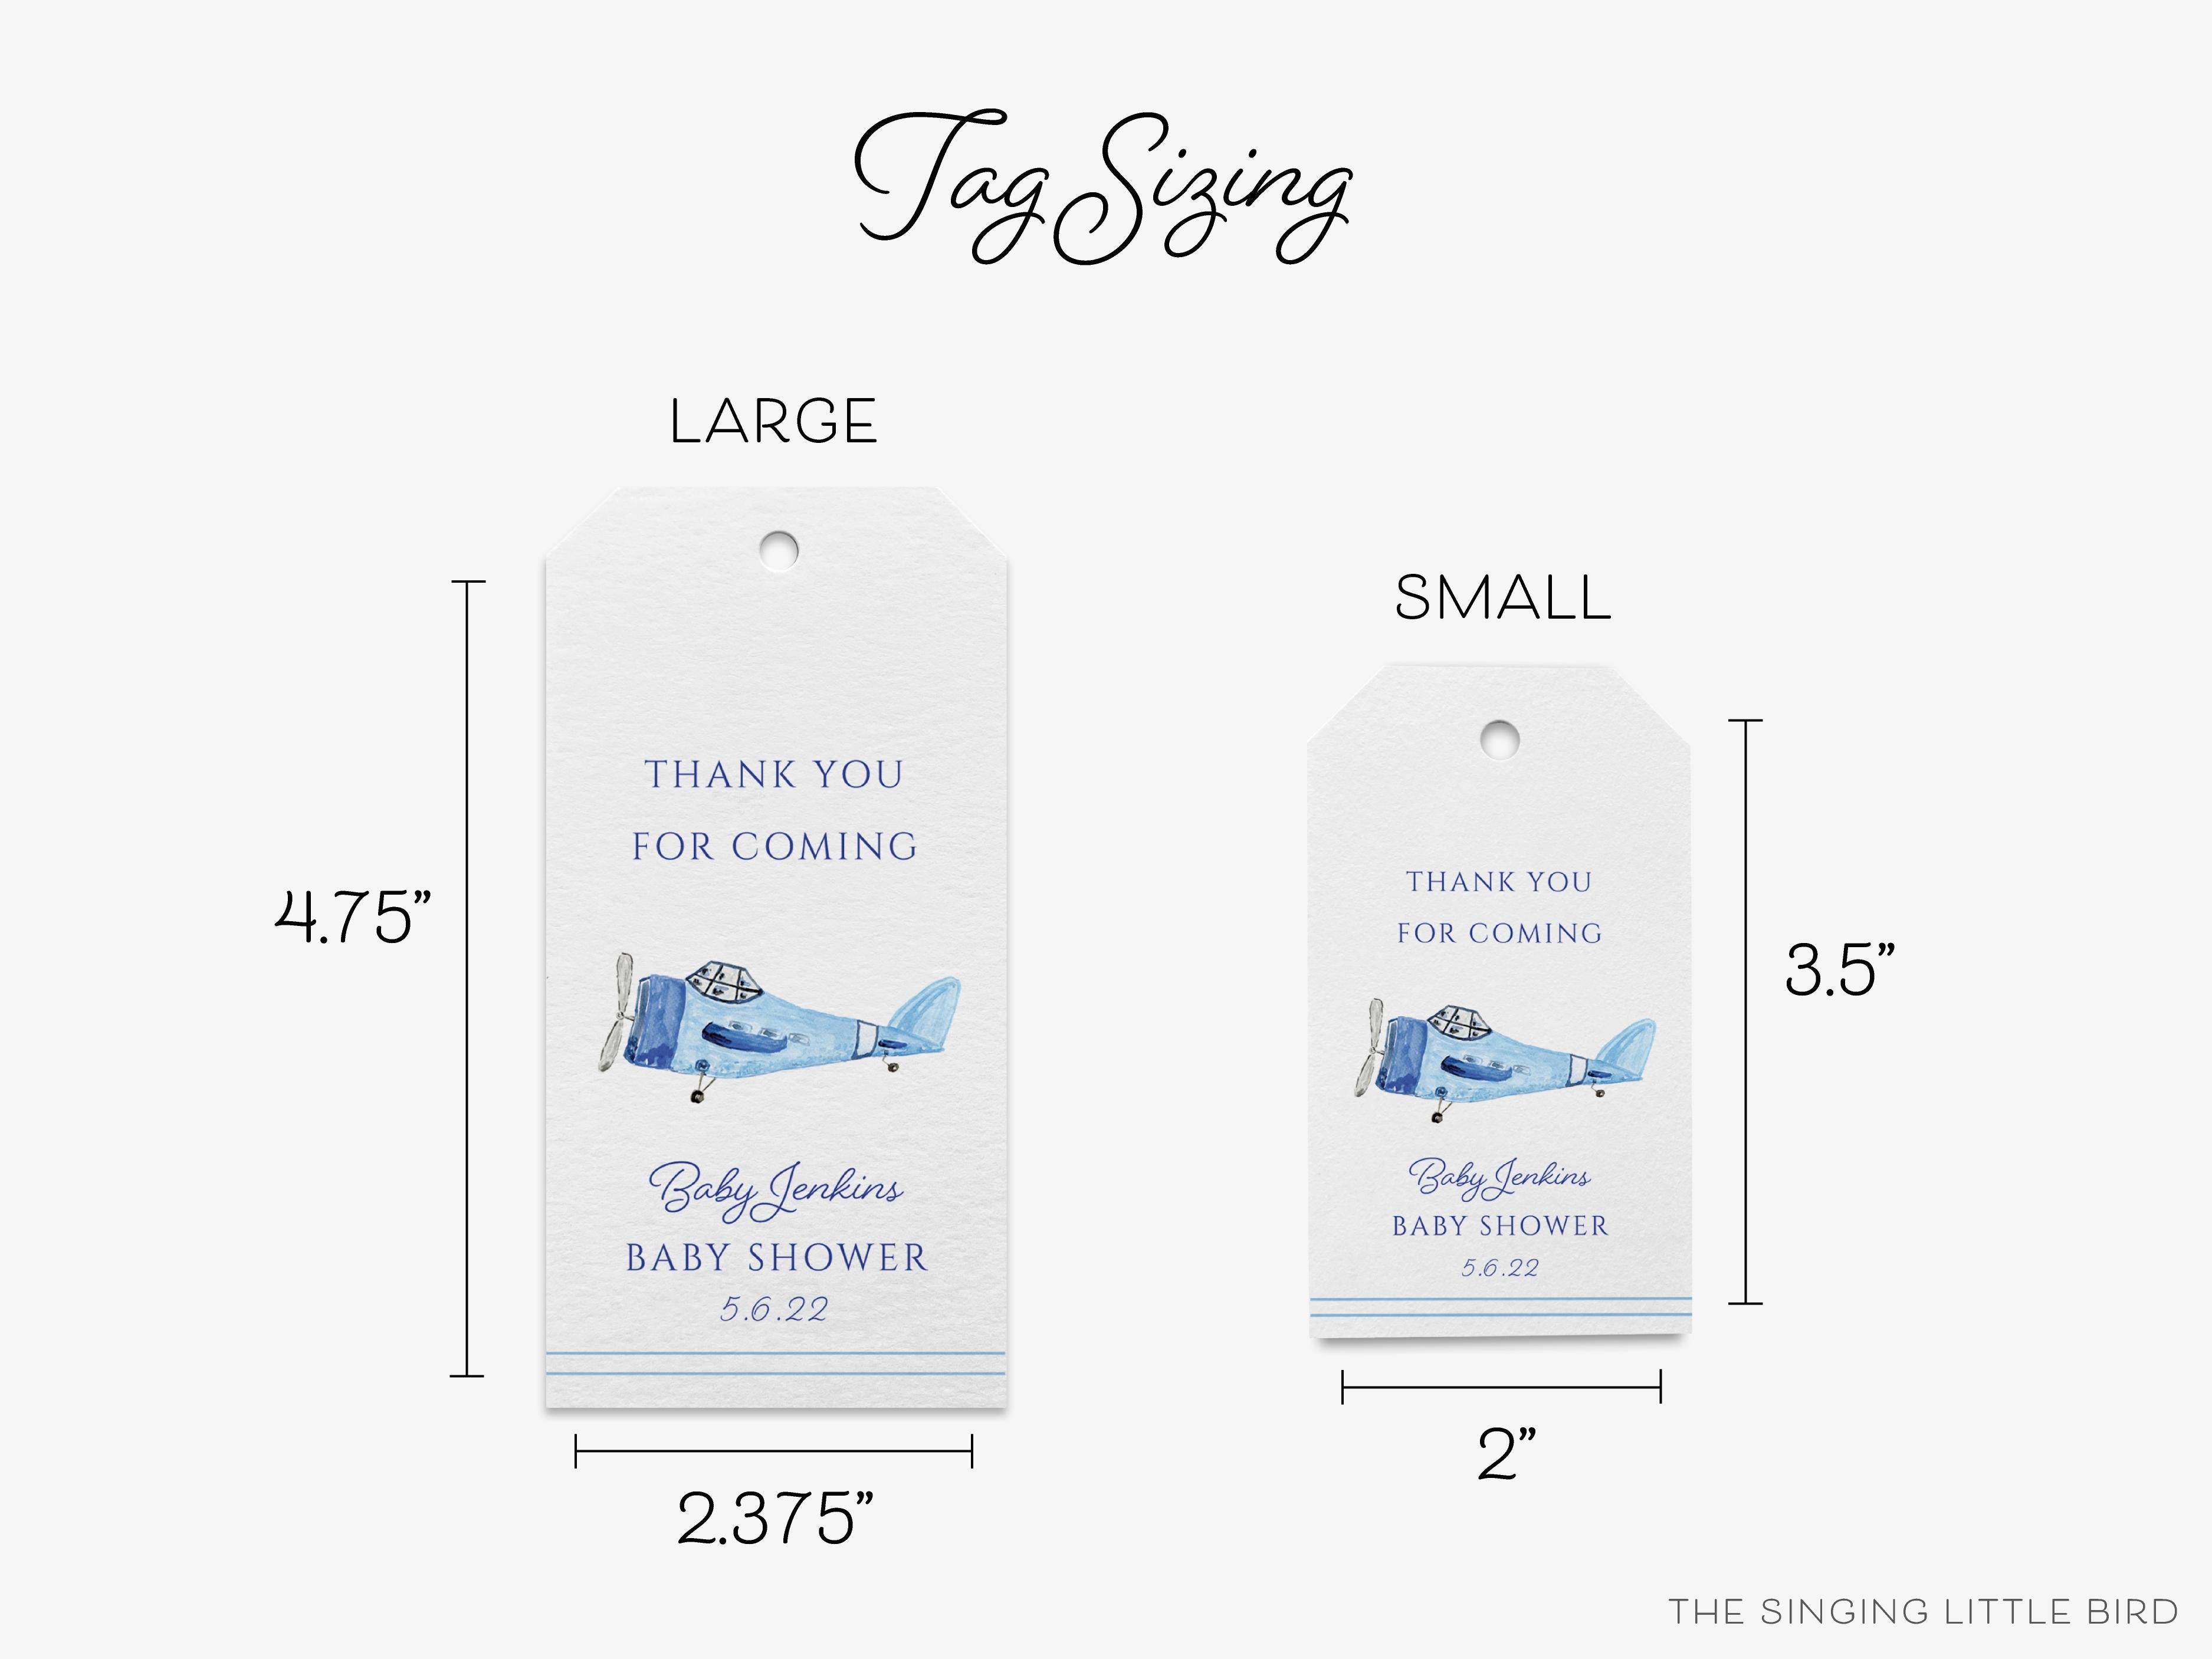 Personalized Vintage Airplane Baby Shower Favor Tag-These gift tags come in sets, hole-punched with white twine and feature our hand-painted watercolor vintage airplane, printed in the USA on 120lb textured stock. They make great tags for gifting or gifts for the vintage lover in your life.-The Singing Little Bird